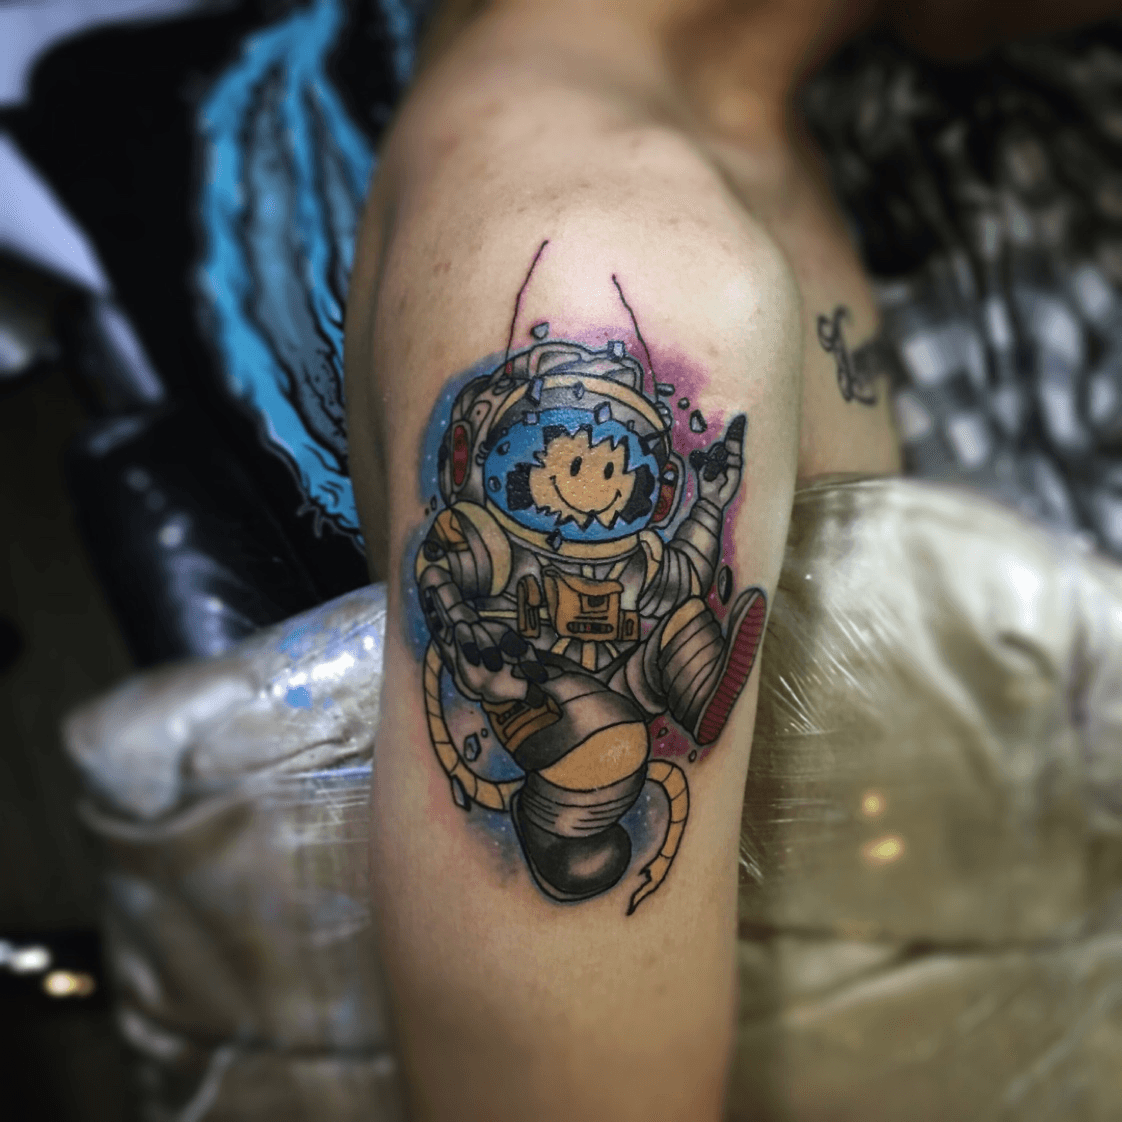 My Chrono Trigger leg sleeve 12 done at this point Tattoo by Andrew  Douglas at Neon Dragon Tattoo in Cedar Rapids Iowa original post on r tattoos  rchronotrigger